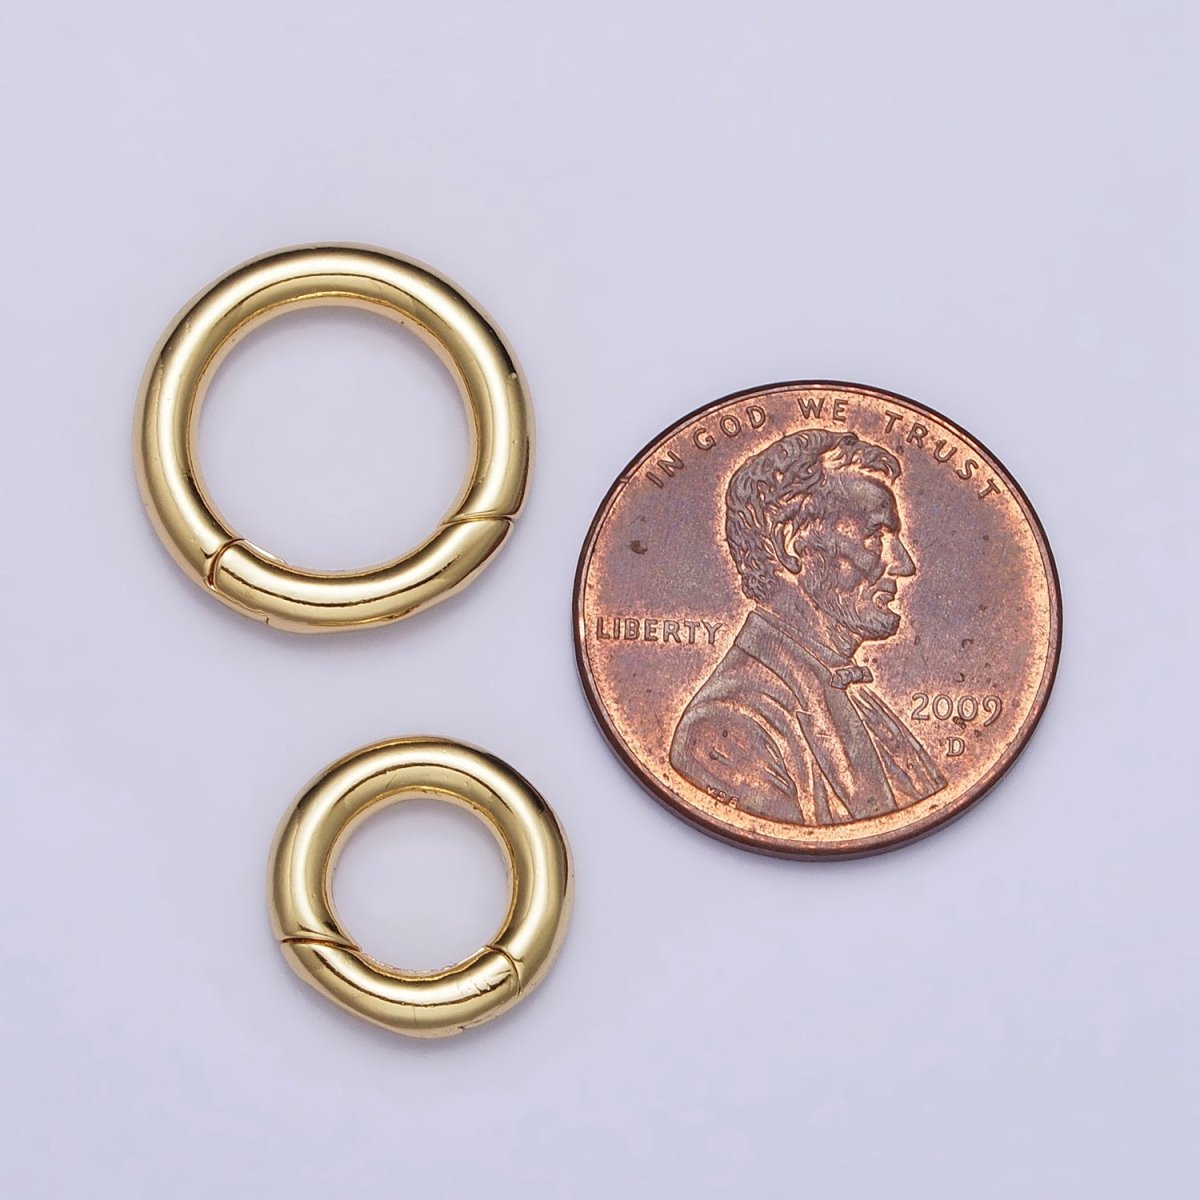 Dainty Gold Silver Spring Gate Ring 10mm, 15mm Round Circle Ring, Round Clasp, Push Clip Clasp, Spring Gate for Jewelry Making Z-340 Z-341 Z-352 Z-353 - DLUXCA